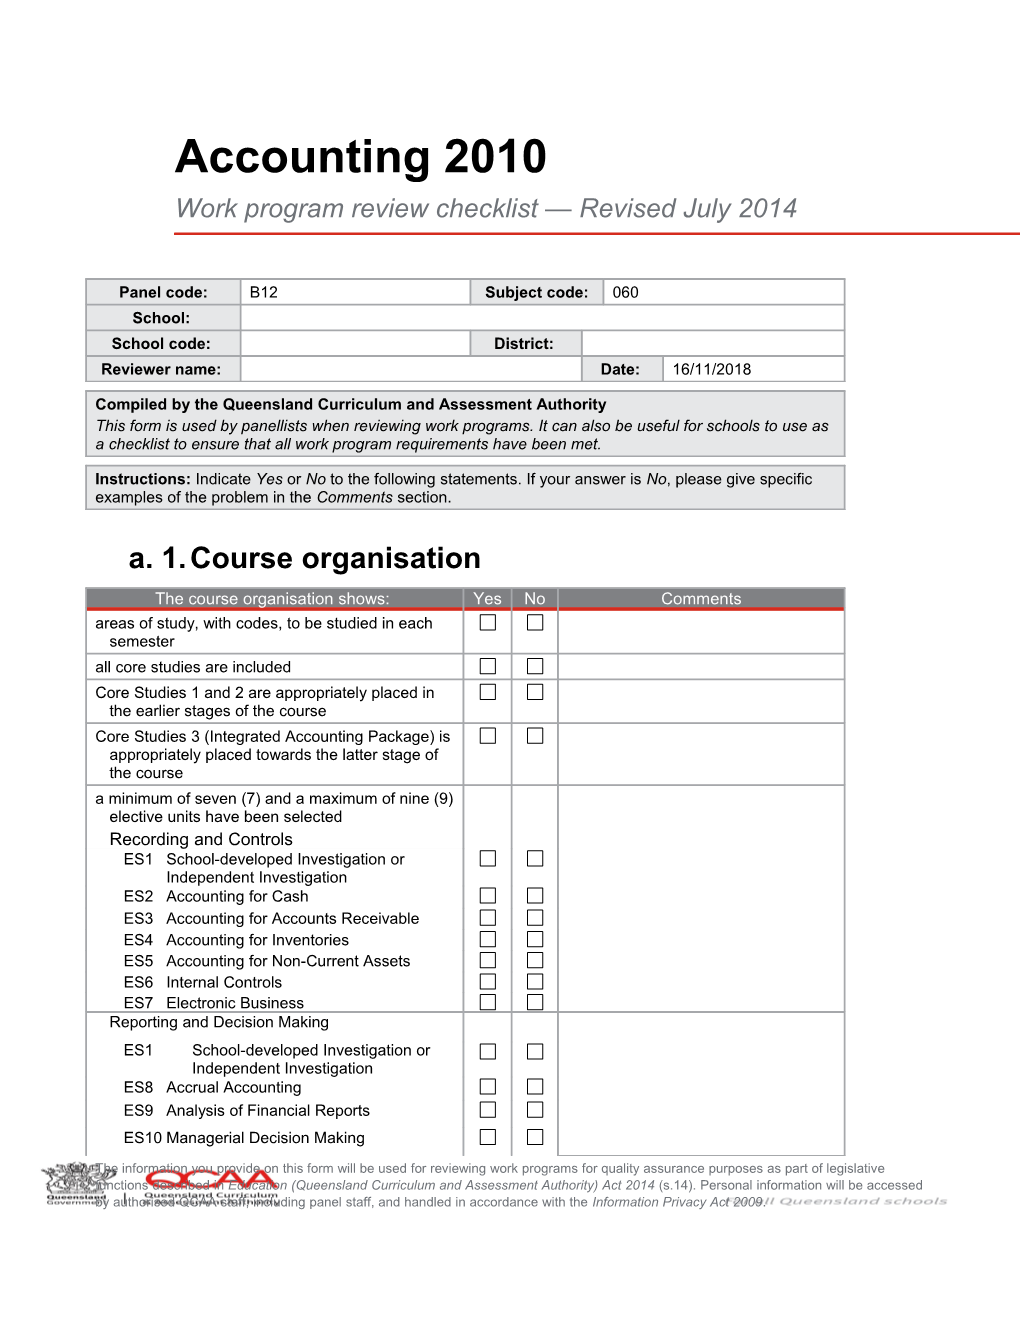 Accounting 2010 Work Program Review Checklist